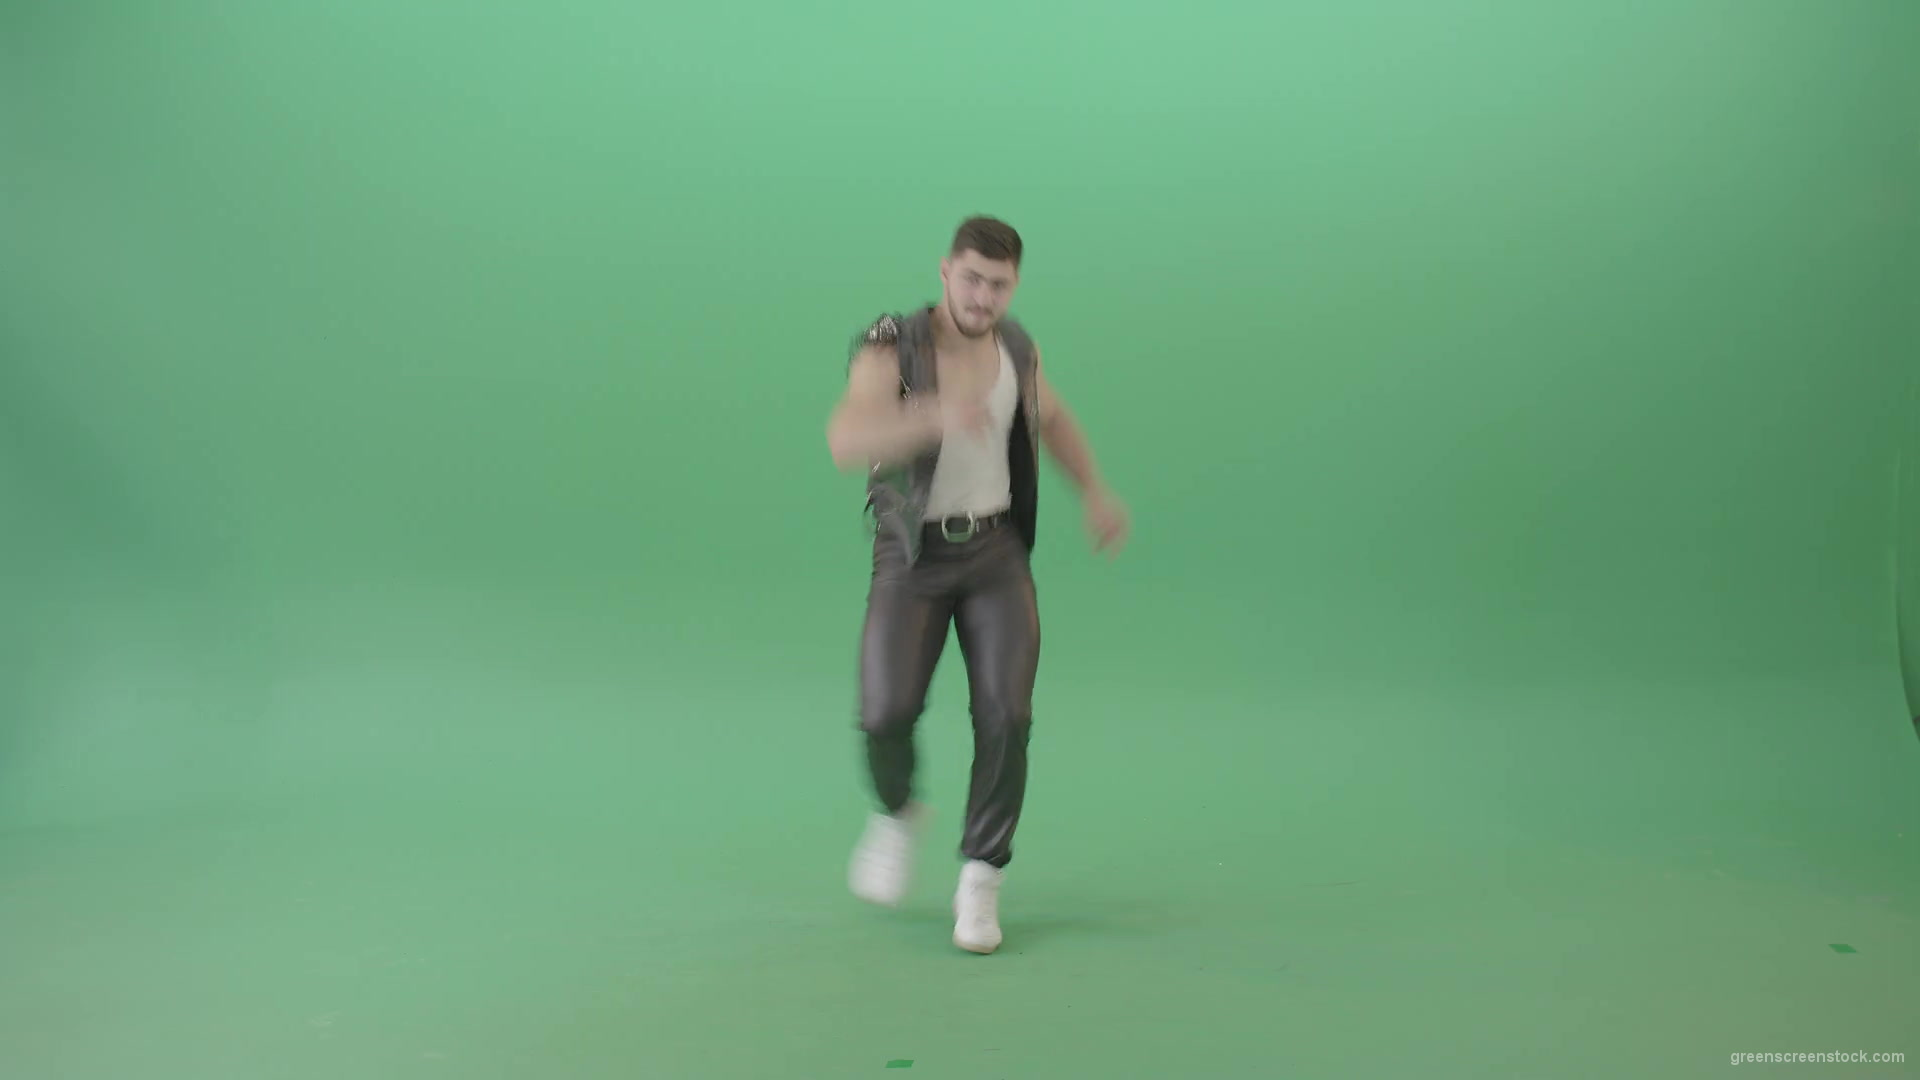 Angry-caucasian-Man-in-Black-leather-costume-dancing-Pop-Moves-on-Green-Screen-4K-Video-Footage-1920_008 Green Screen Stock